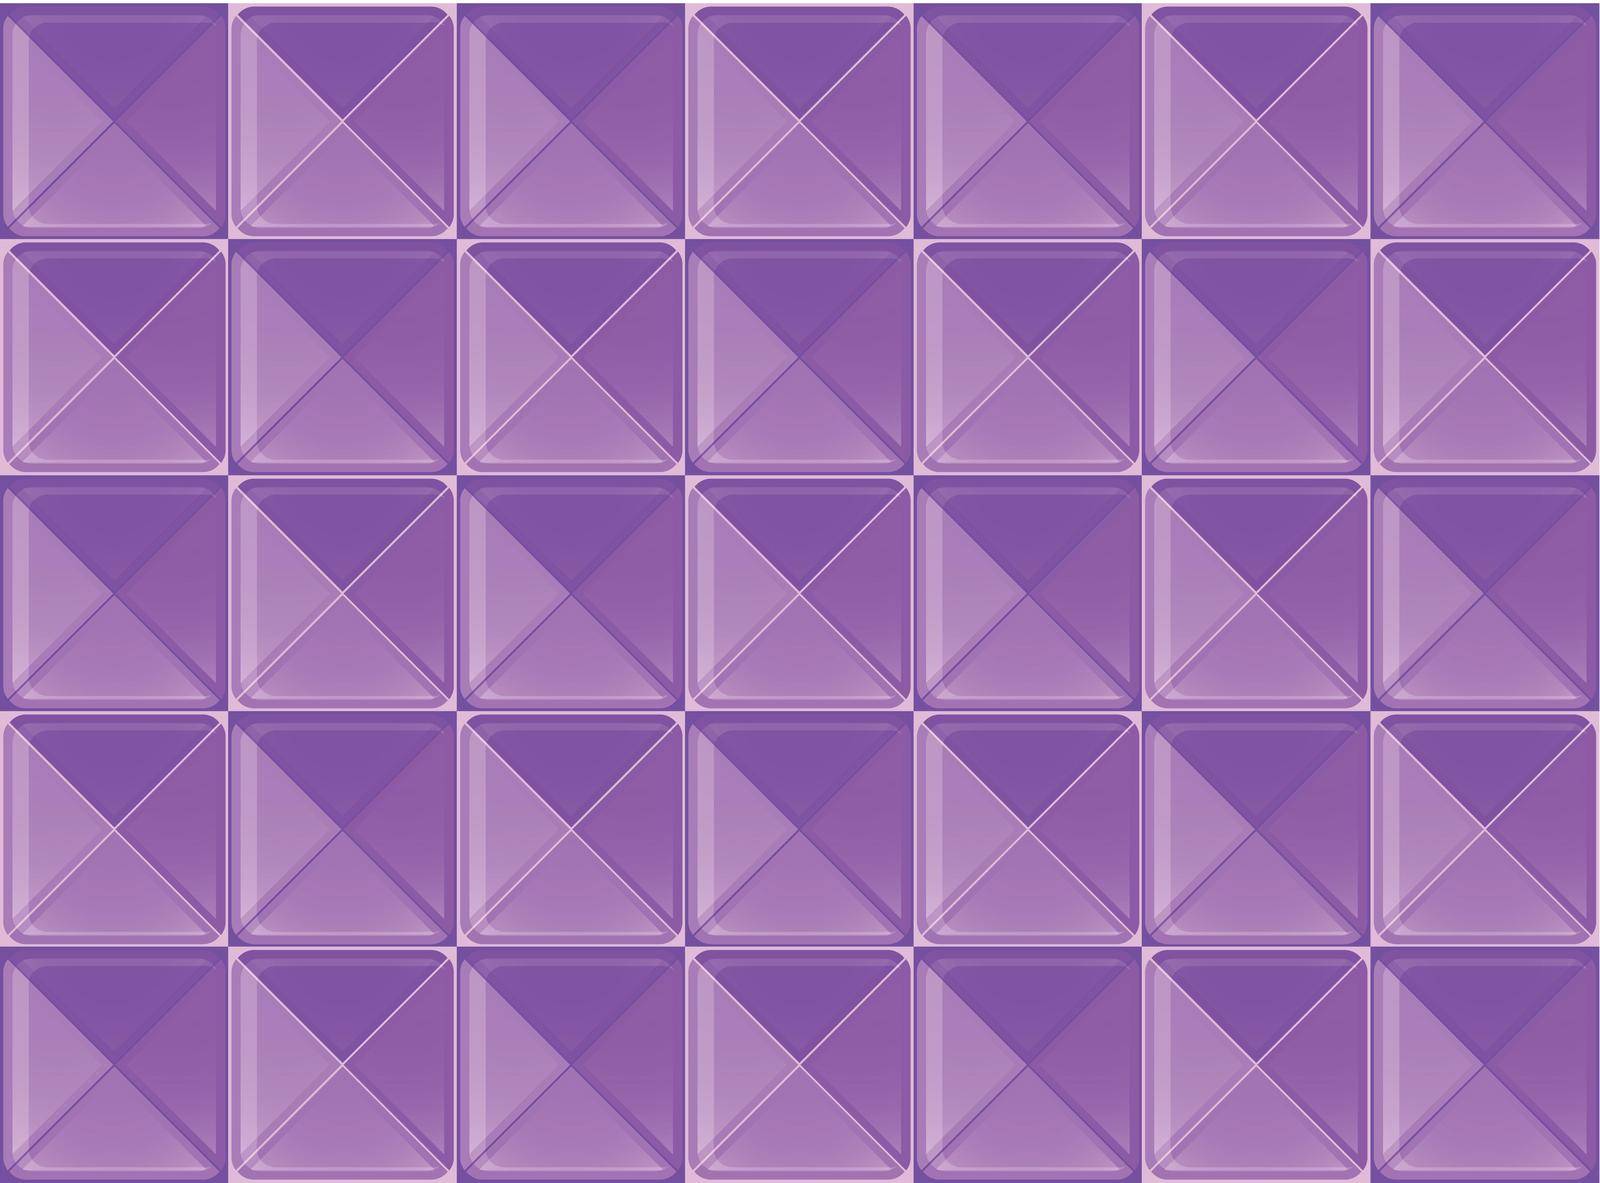 Illustration of a purple square pattern of a wallpaper